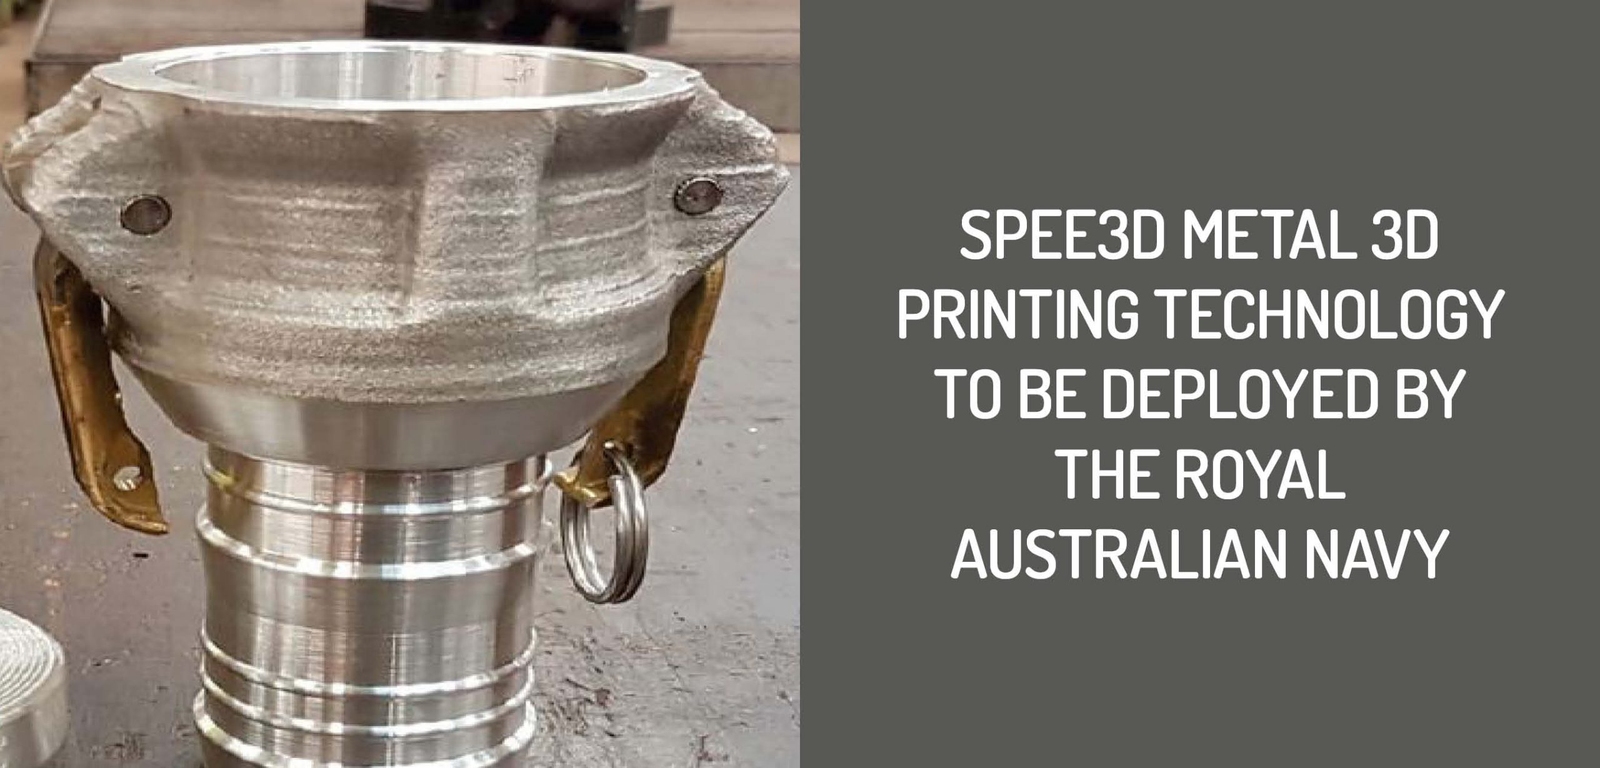 SPEE3D Metal 3D Printing Technology Deployed by the Royal Australian Navy